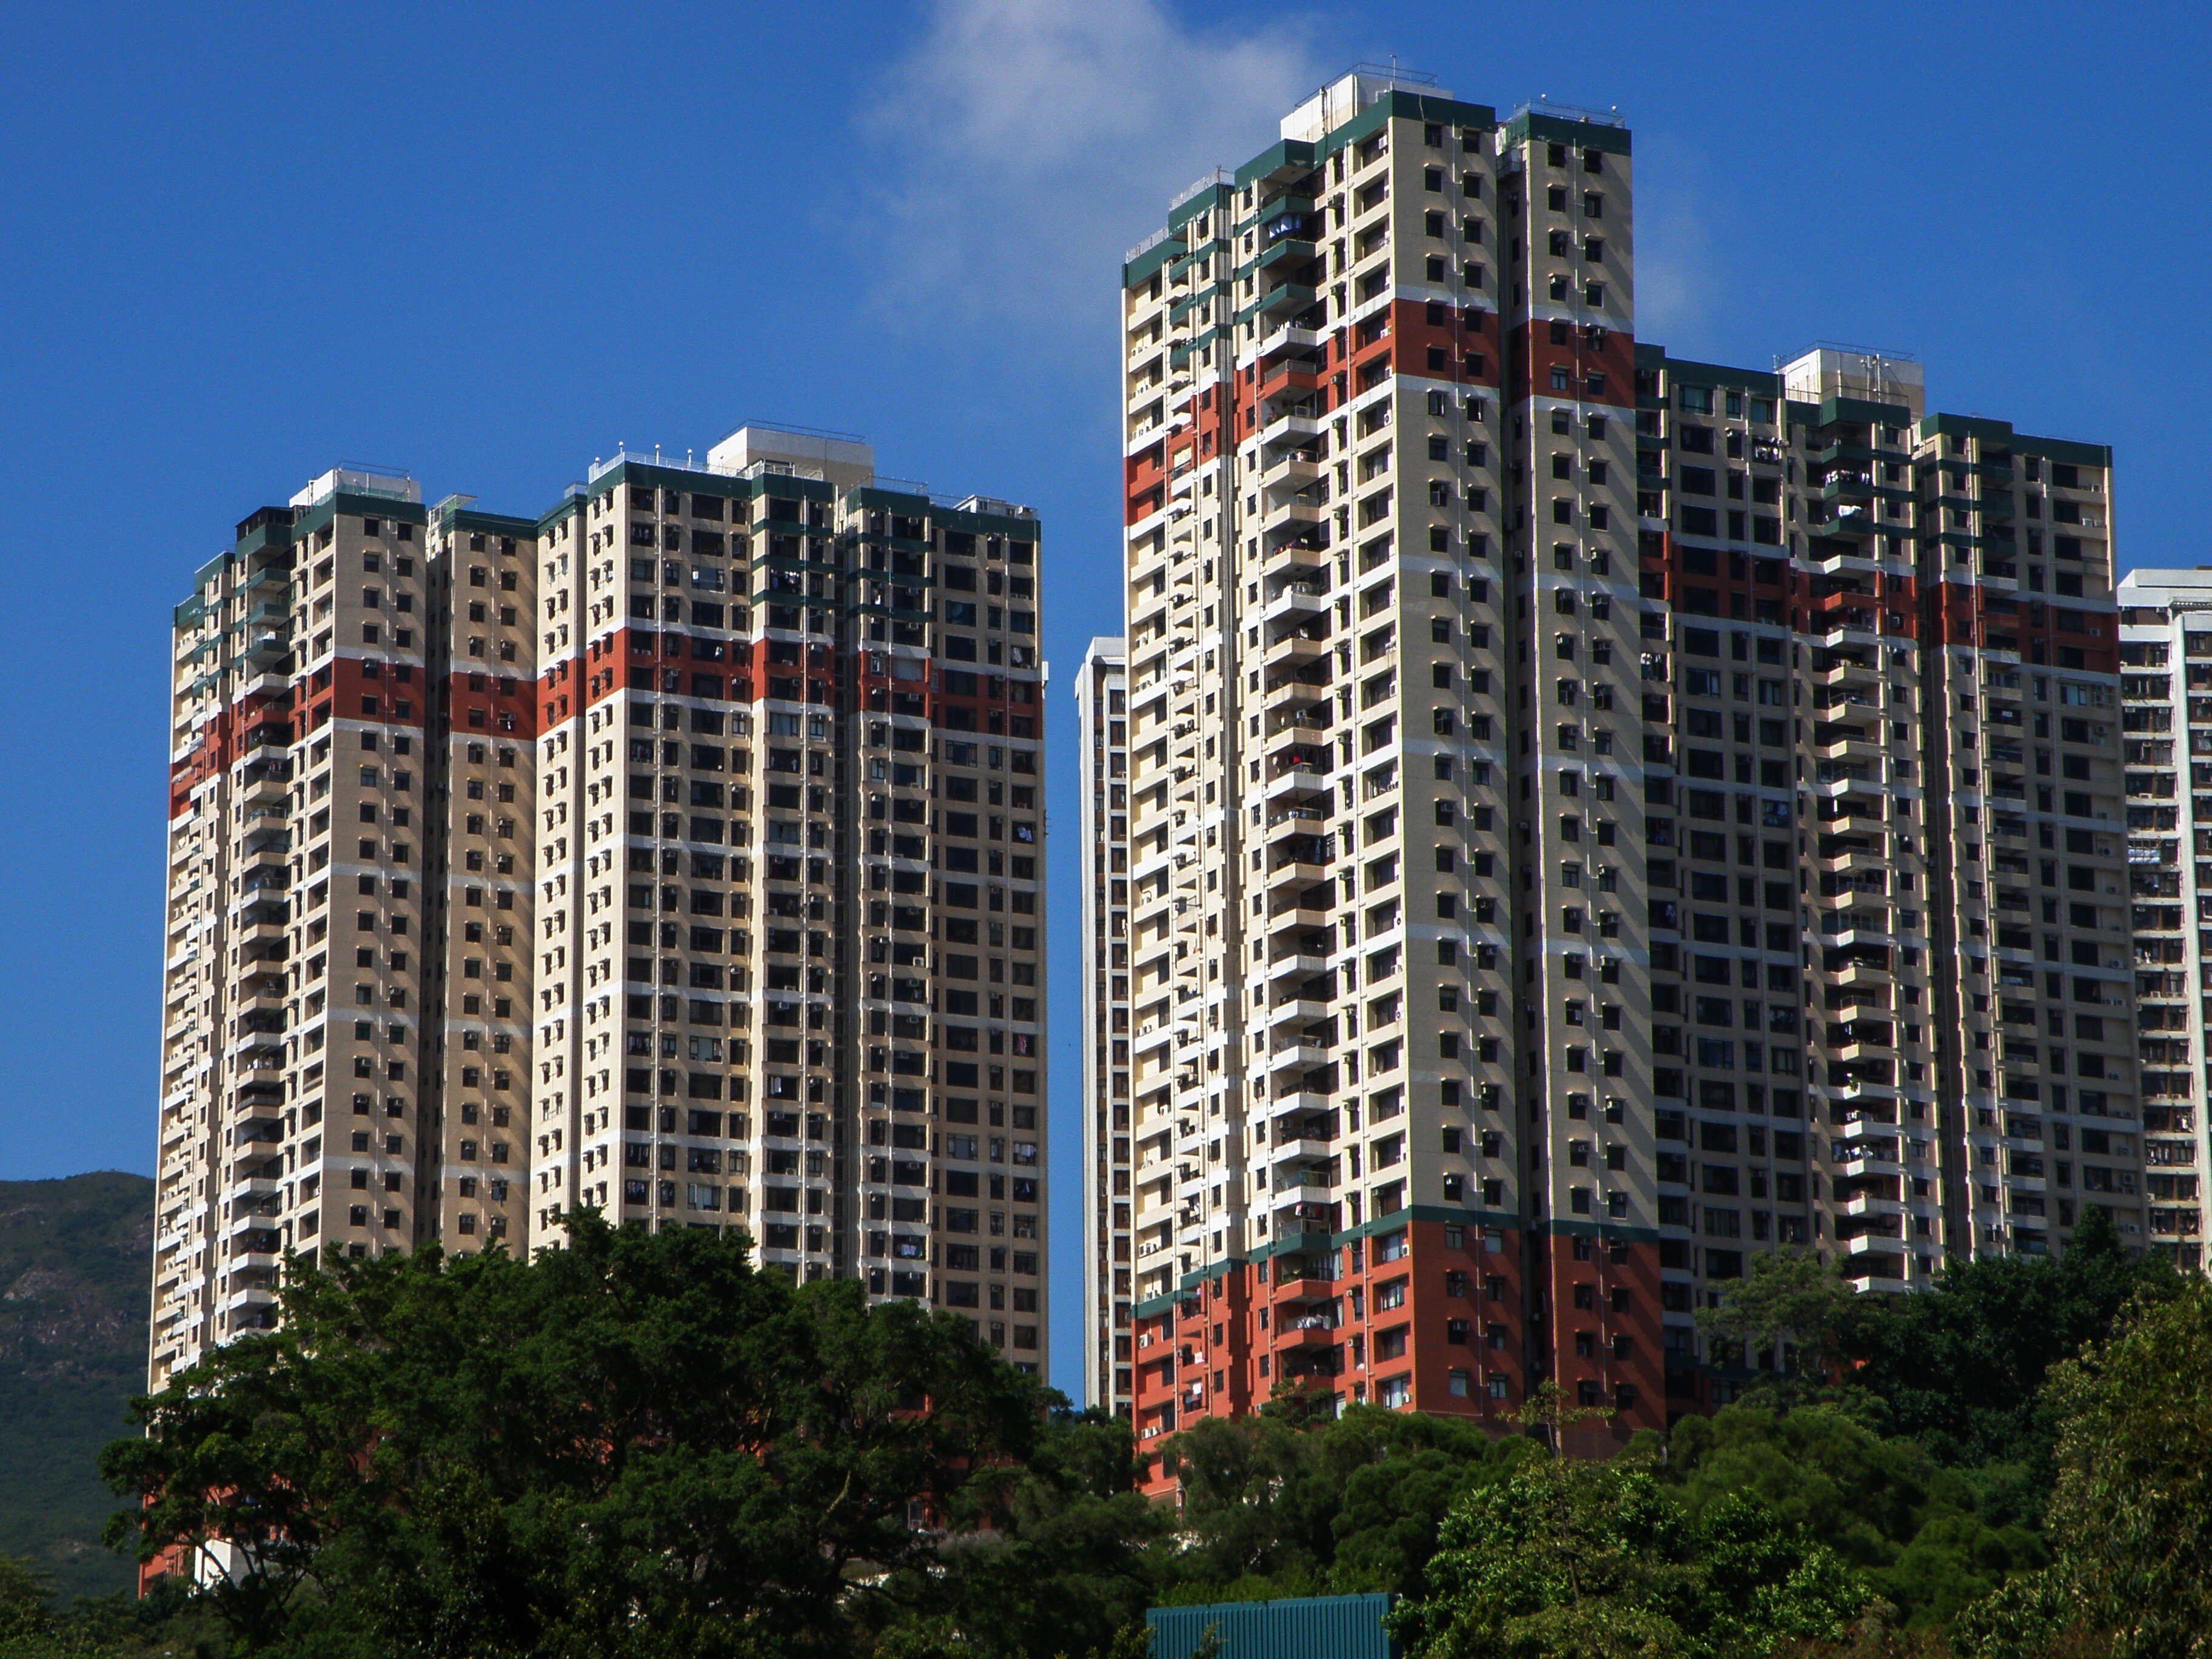 Negotiations on the lease renewal of Pokfulam Gardens started in 2004, two years before the expiry of the original lease. Photo: Wikipedia